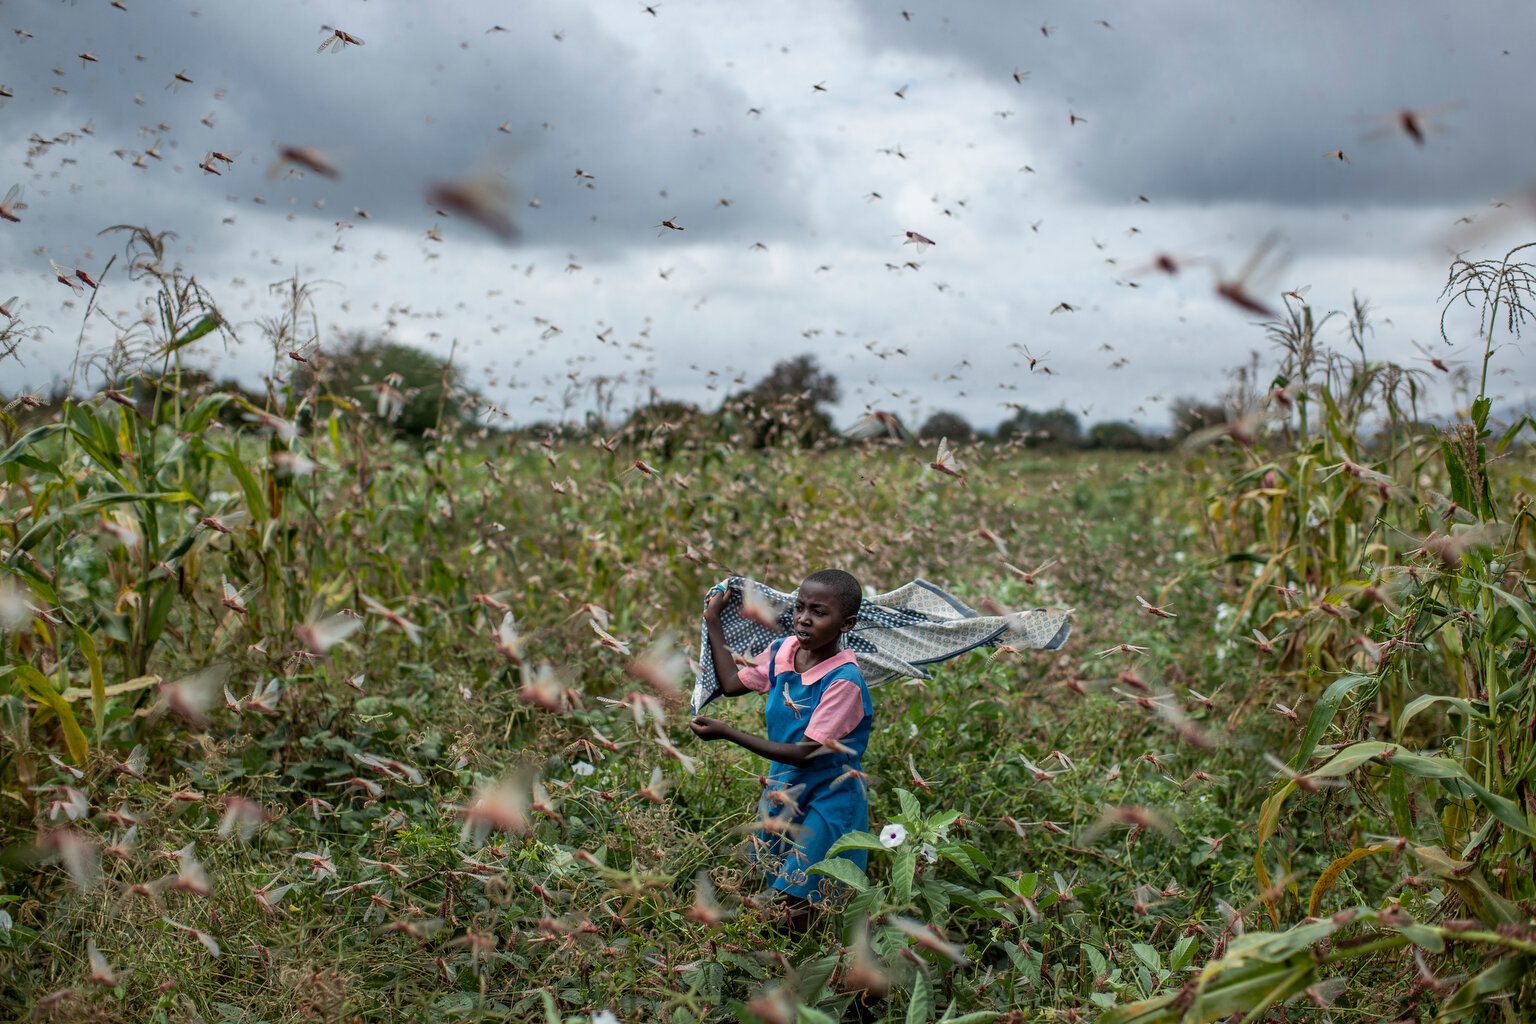  A farmer's daughter waves her shawl in the air to try to chase away swarms of desert locusts from her crops, in Katitika village, Kitui county, Kenya Friday, Jan. 24, 2020. (AP Photo/Ben Curtis) 